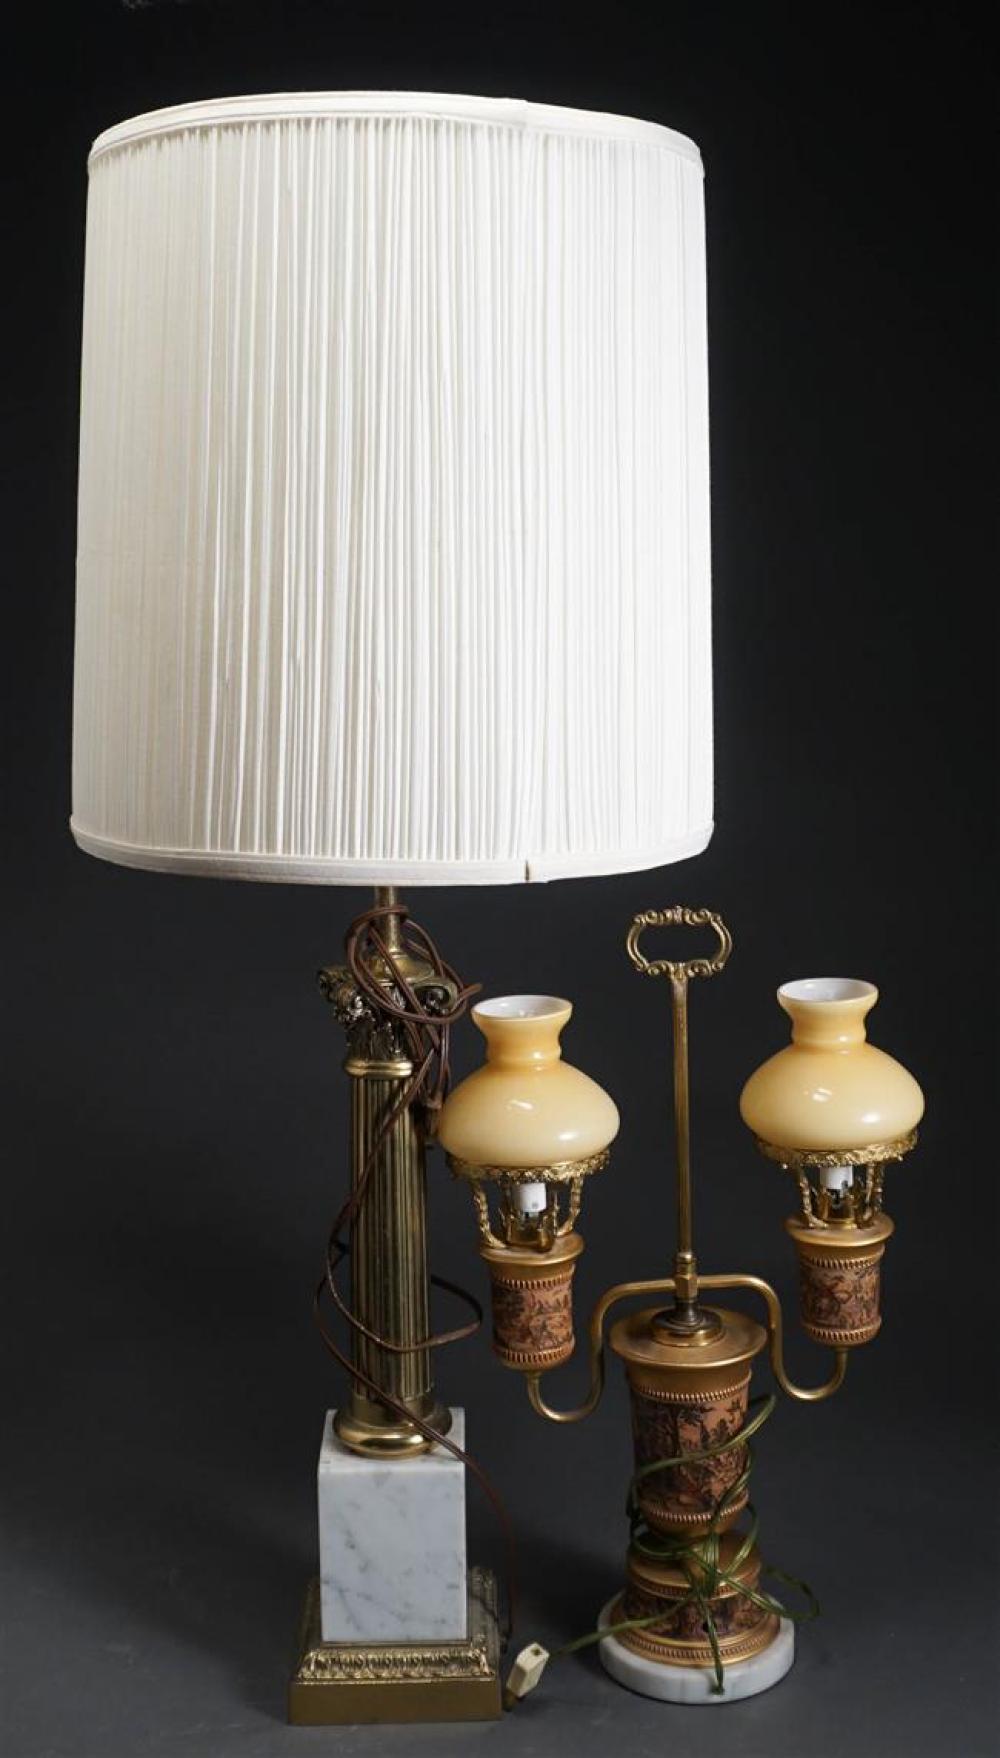 TWO EMPIRE STYLE TABLE LAMPS, H